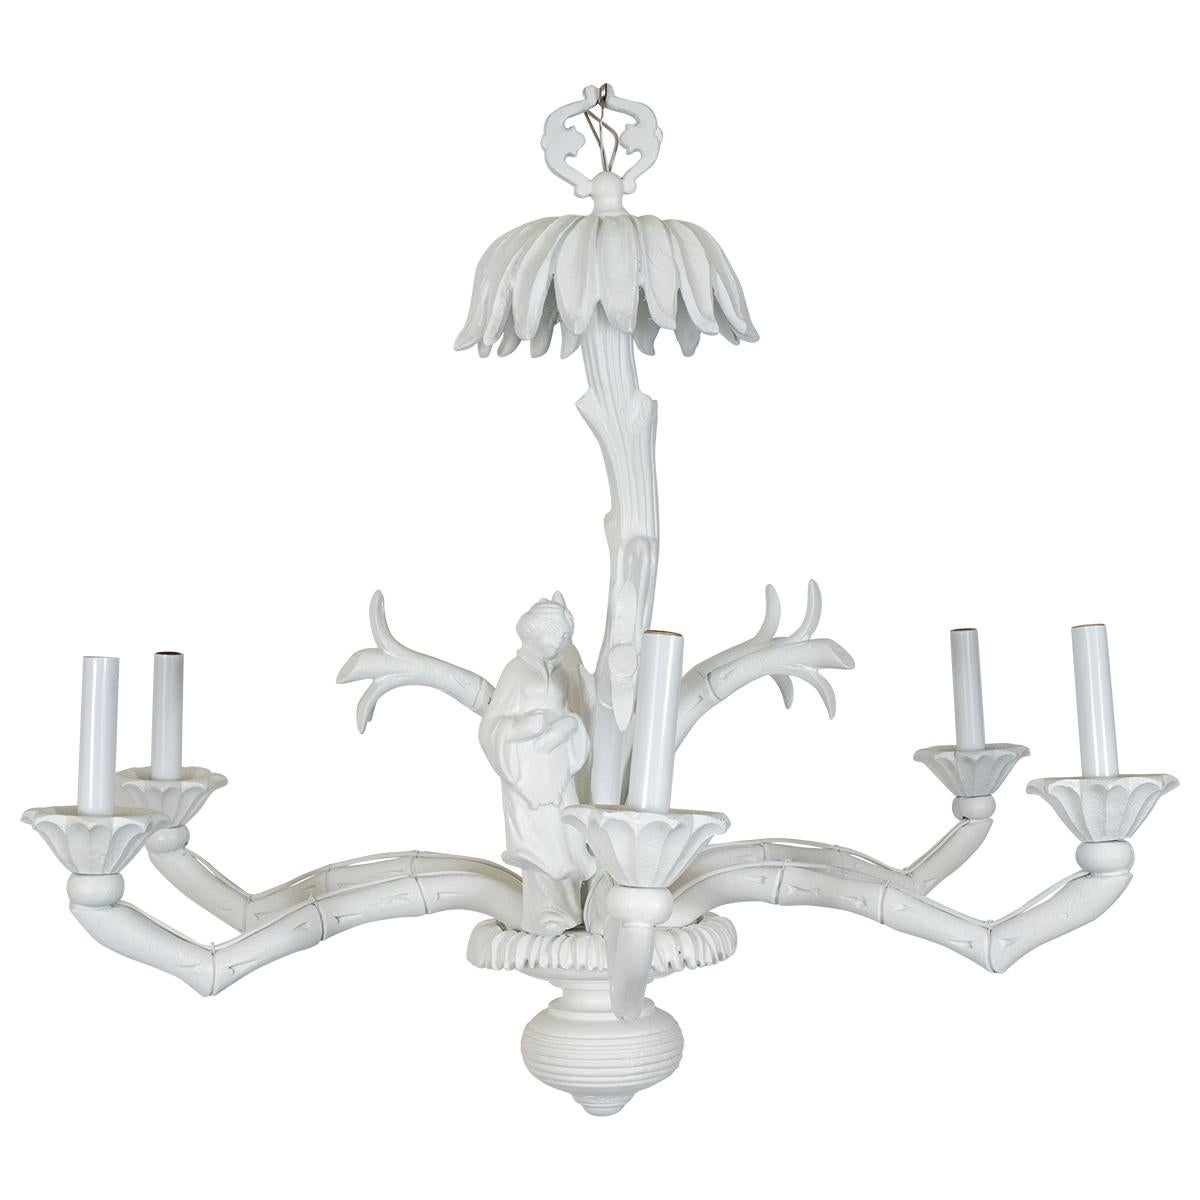 White cast aluminum chandelier with chinoiserie motif.